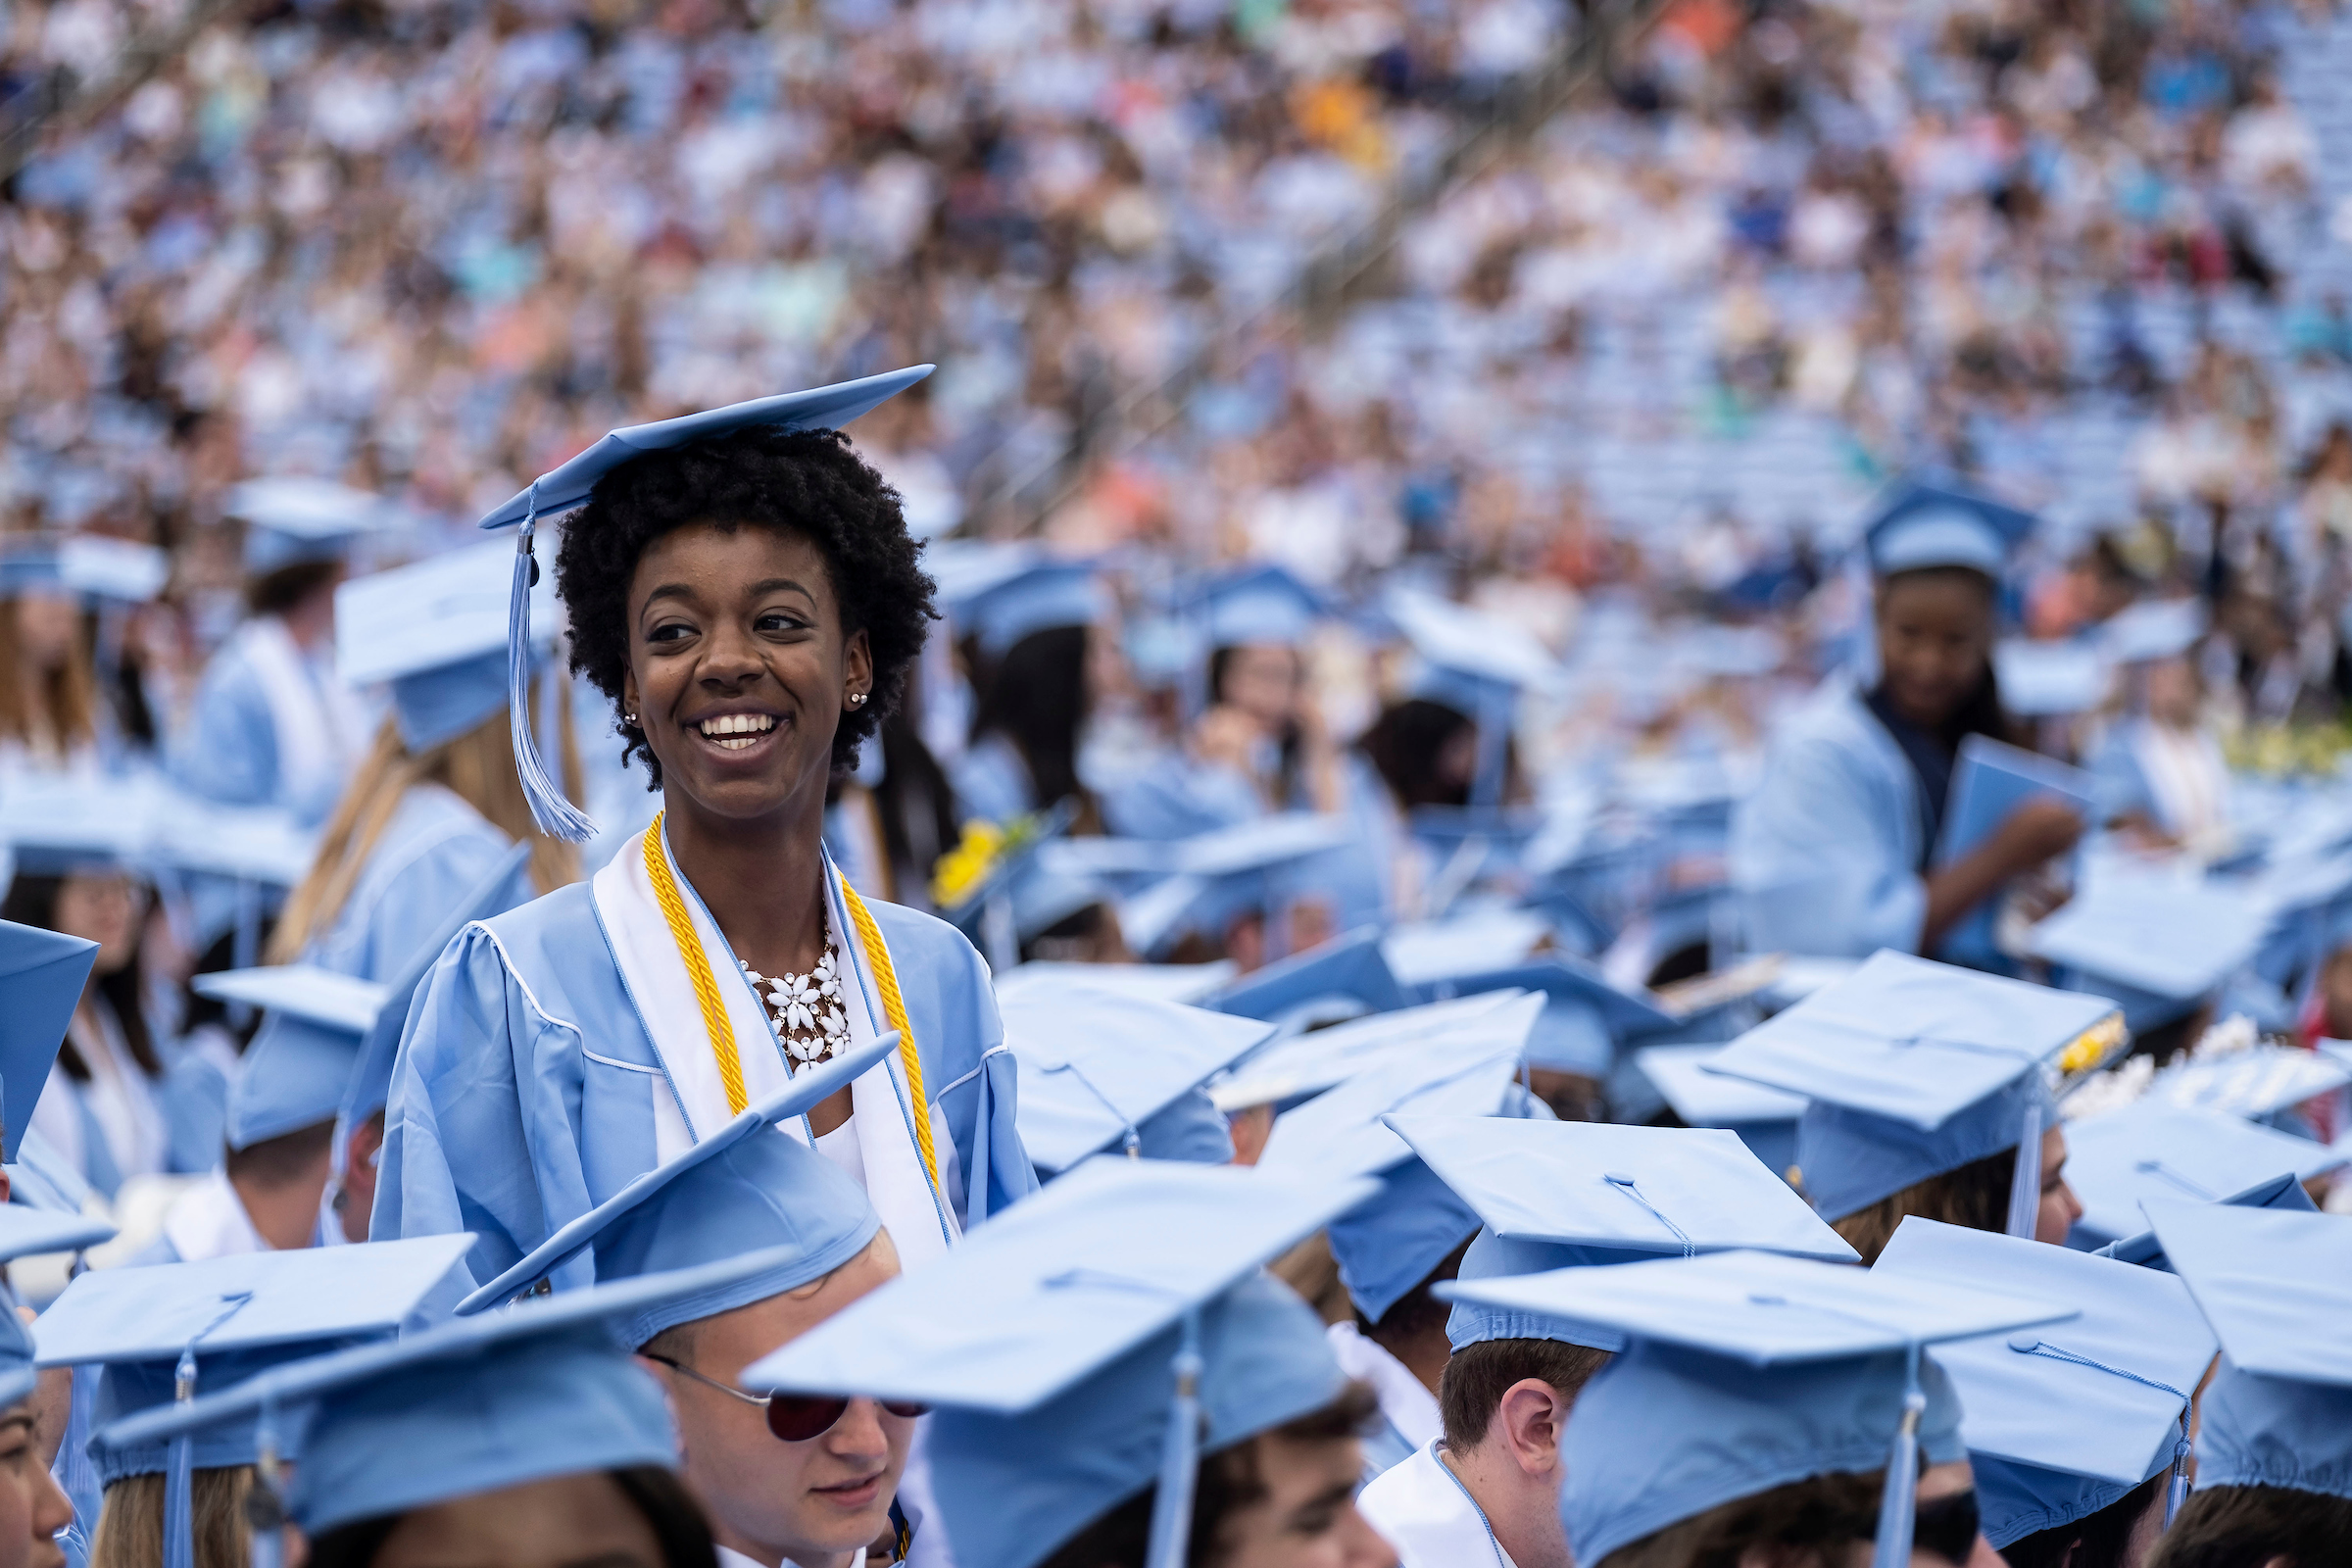 The University of North Carolina at Chapel Hill celebrates the graduation of more than 6,000 students at the annual Spring Commencement May 12, 2019 at Kenan Memorial Stadium. Interim Chancellor Kevin M. Guskiewicz presided over the ceremony, which marked the graduation of 3,944 undergraduates, 1,244 masters students, 258 doctoral students and 588 professional students. Jonathan Reckford, 1984 Carolina alumnus and CEO of Habitat for Humanity, delivered the keynote address. (Jon Gardiner/UNC-Chapel Hill)A graduate smiles in a sea of Carolina blue at the 2019 Commencement ceremonies on May 12. (photo by Jon Gardiner)